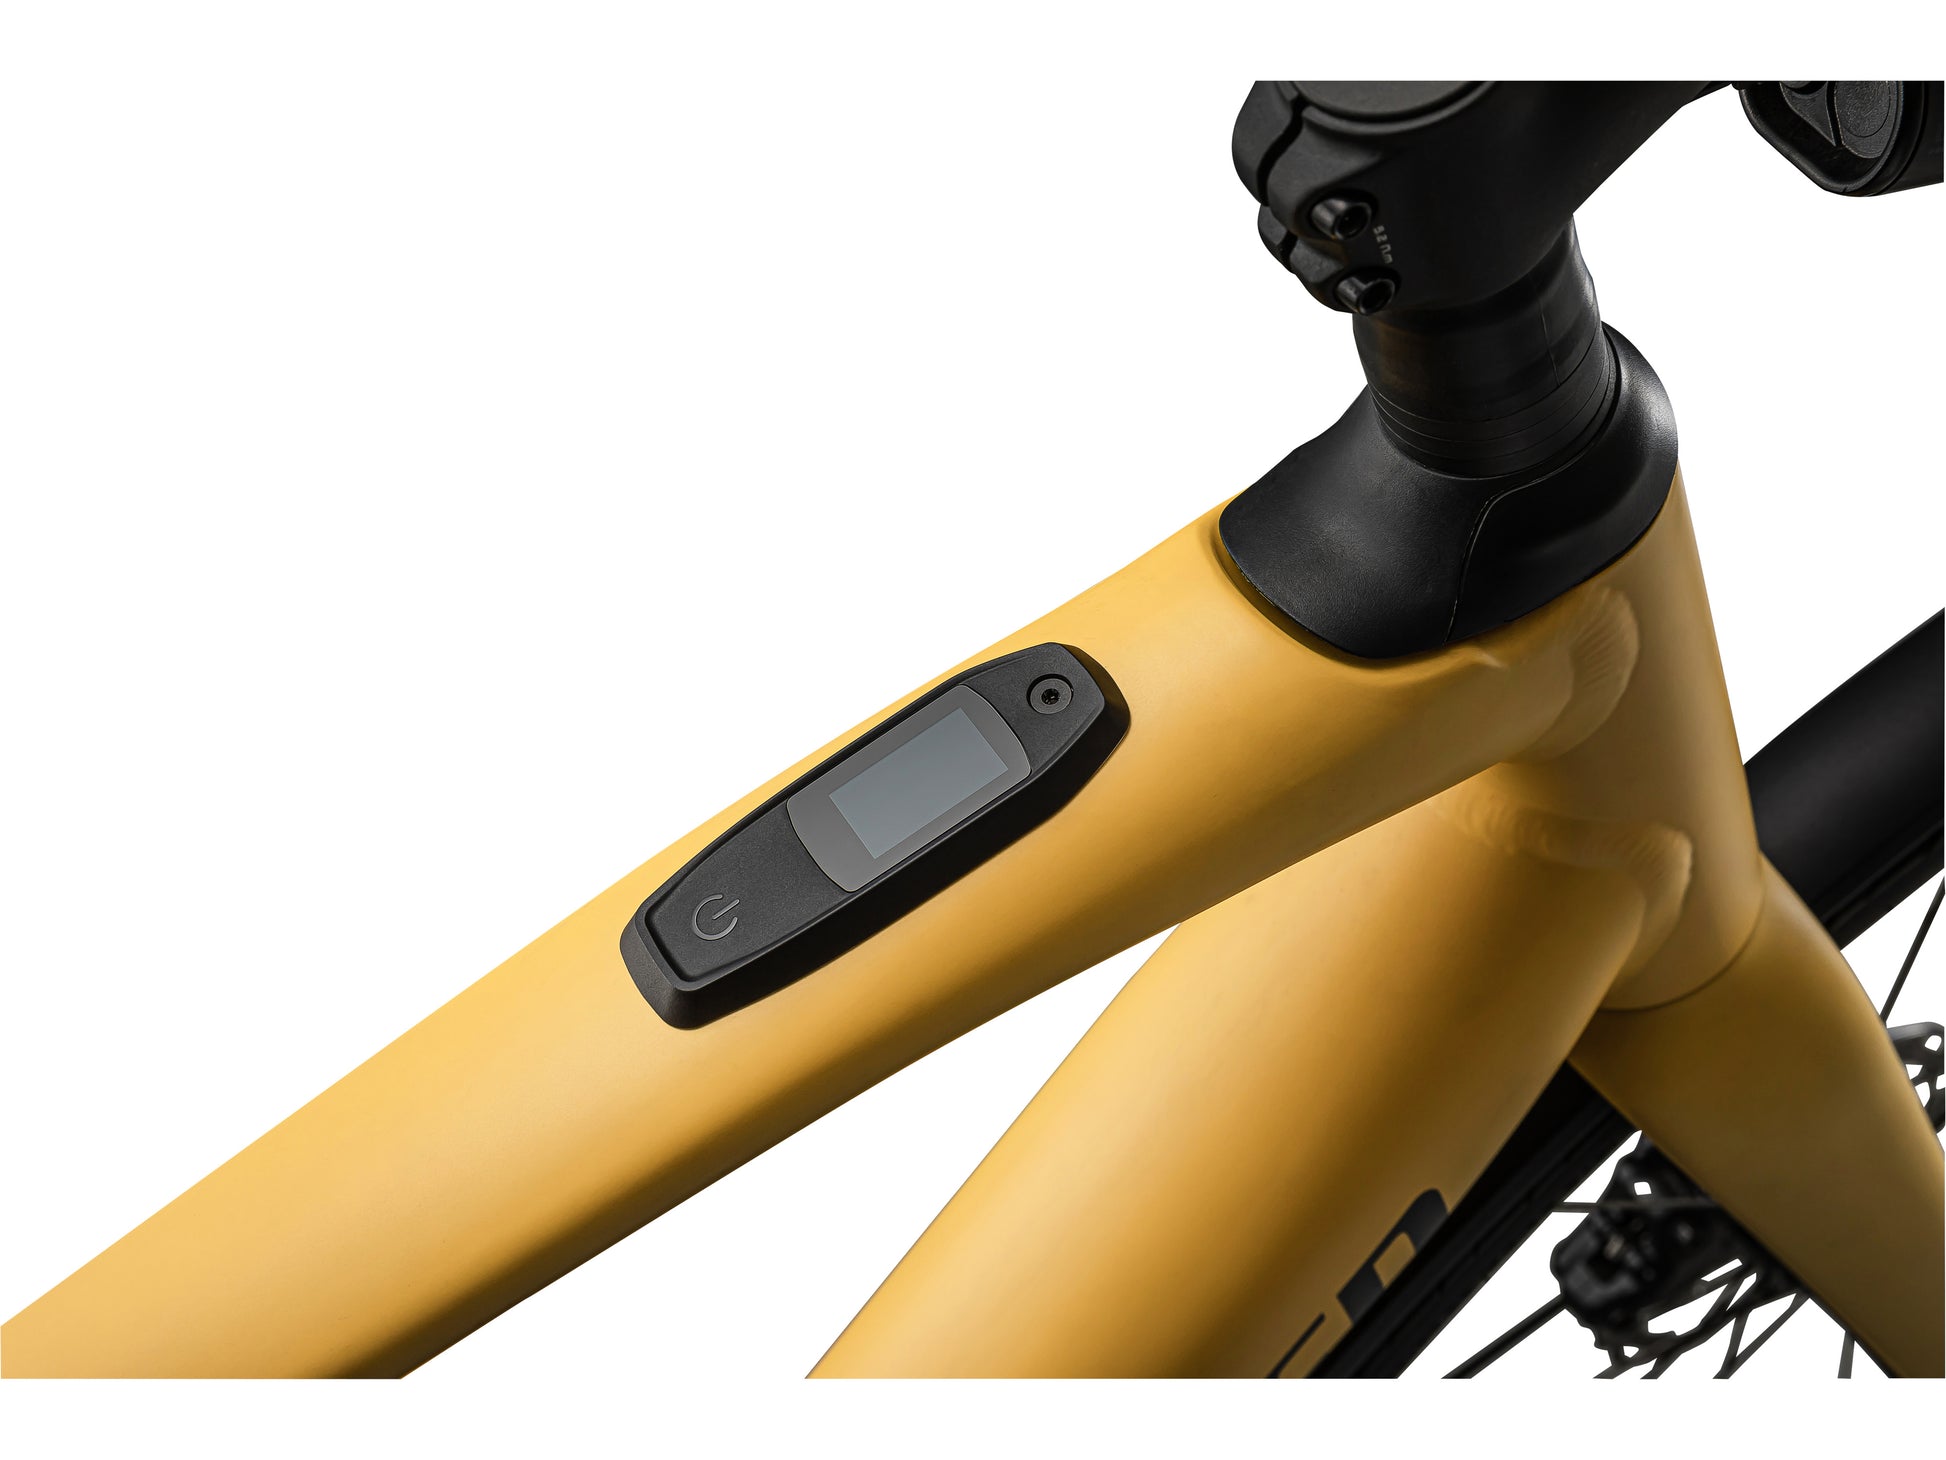 Specialized Turbo Vado SL 5.0 EQ eMTB Brassy Yellow Black Reflective close up top tube display